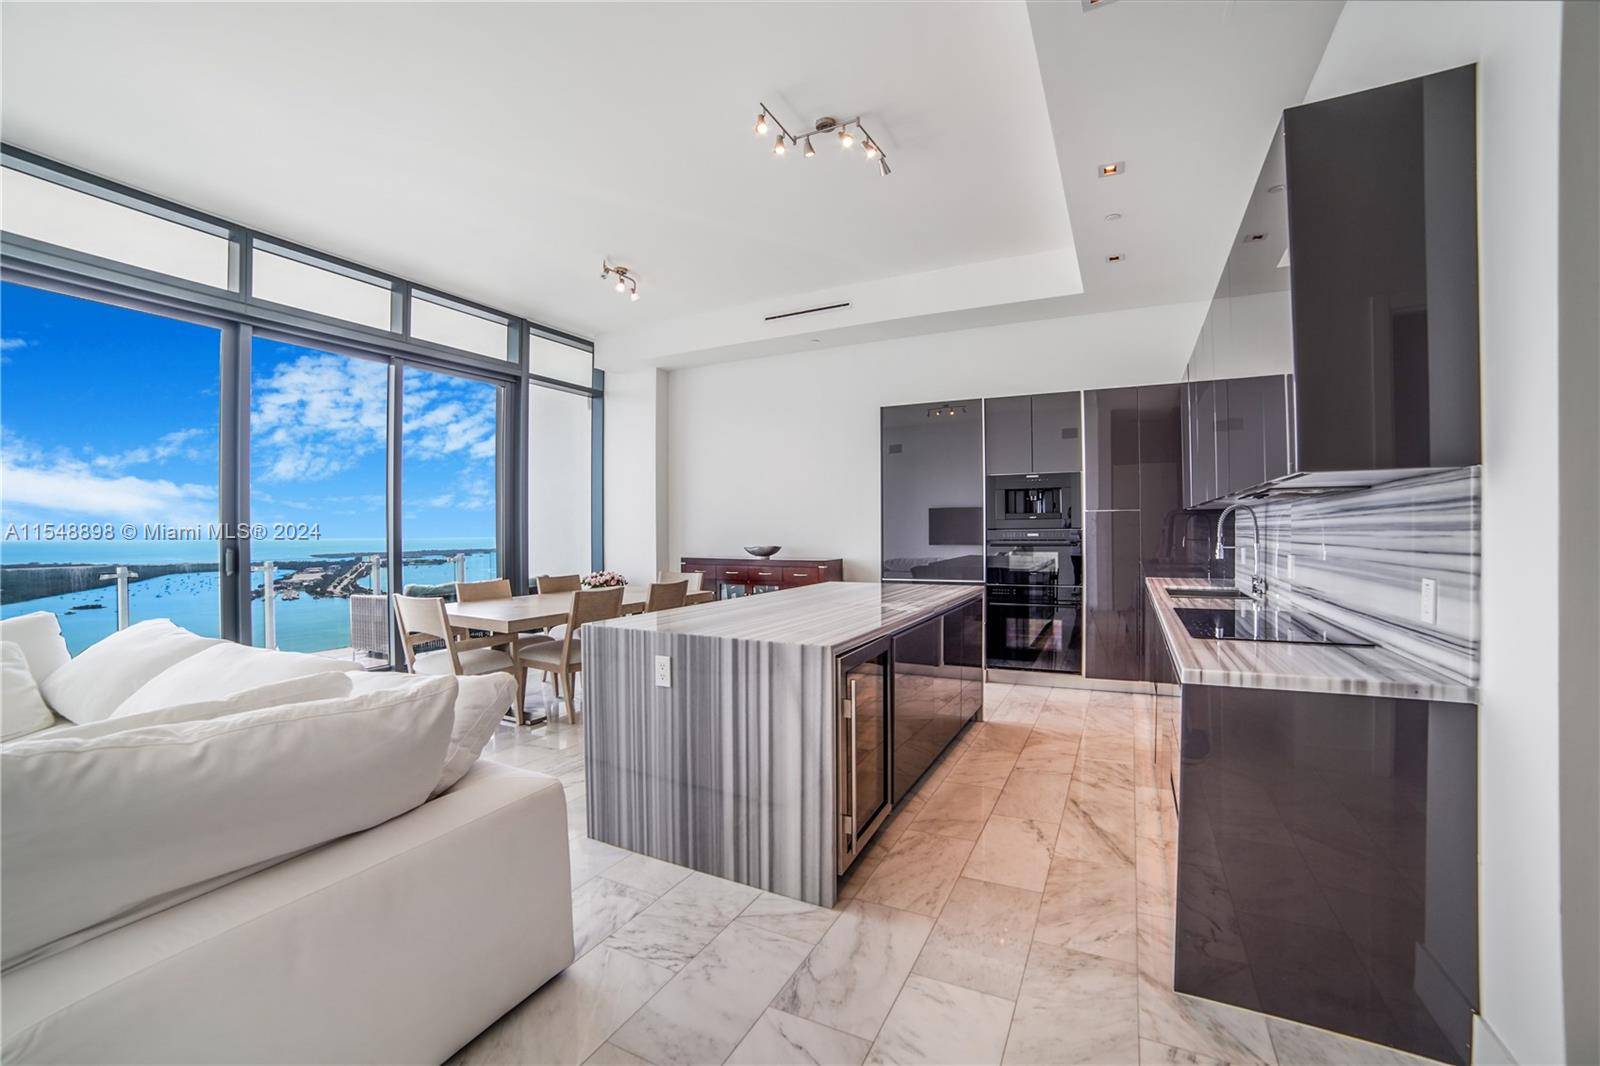 Experience mesmerizing views of Biscayne Bay and the city skyline from this lower PH corner unit in Echo Brickell featuring 3 bedrooms den 3.